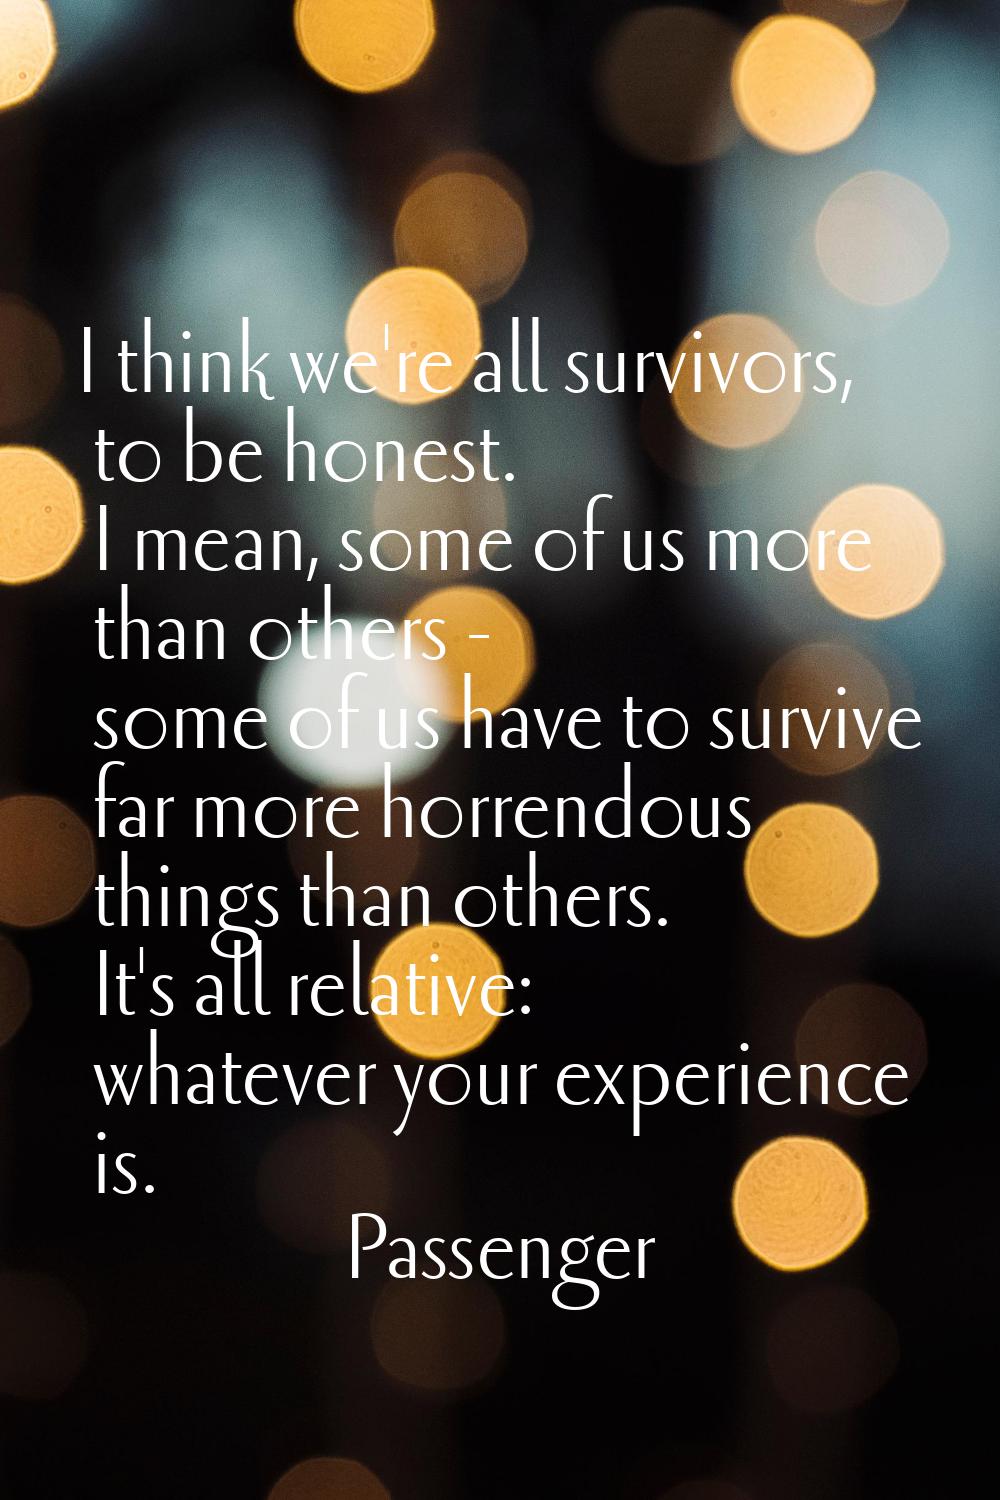 I think we're all survivors, to be honest. I mean, some of us more than others - some of us have to